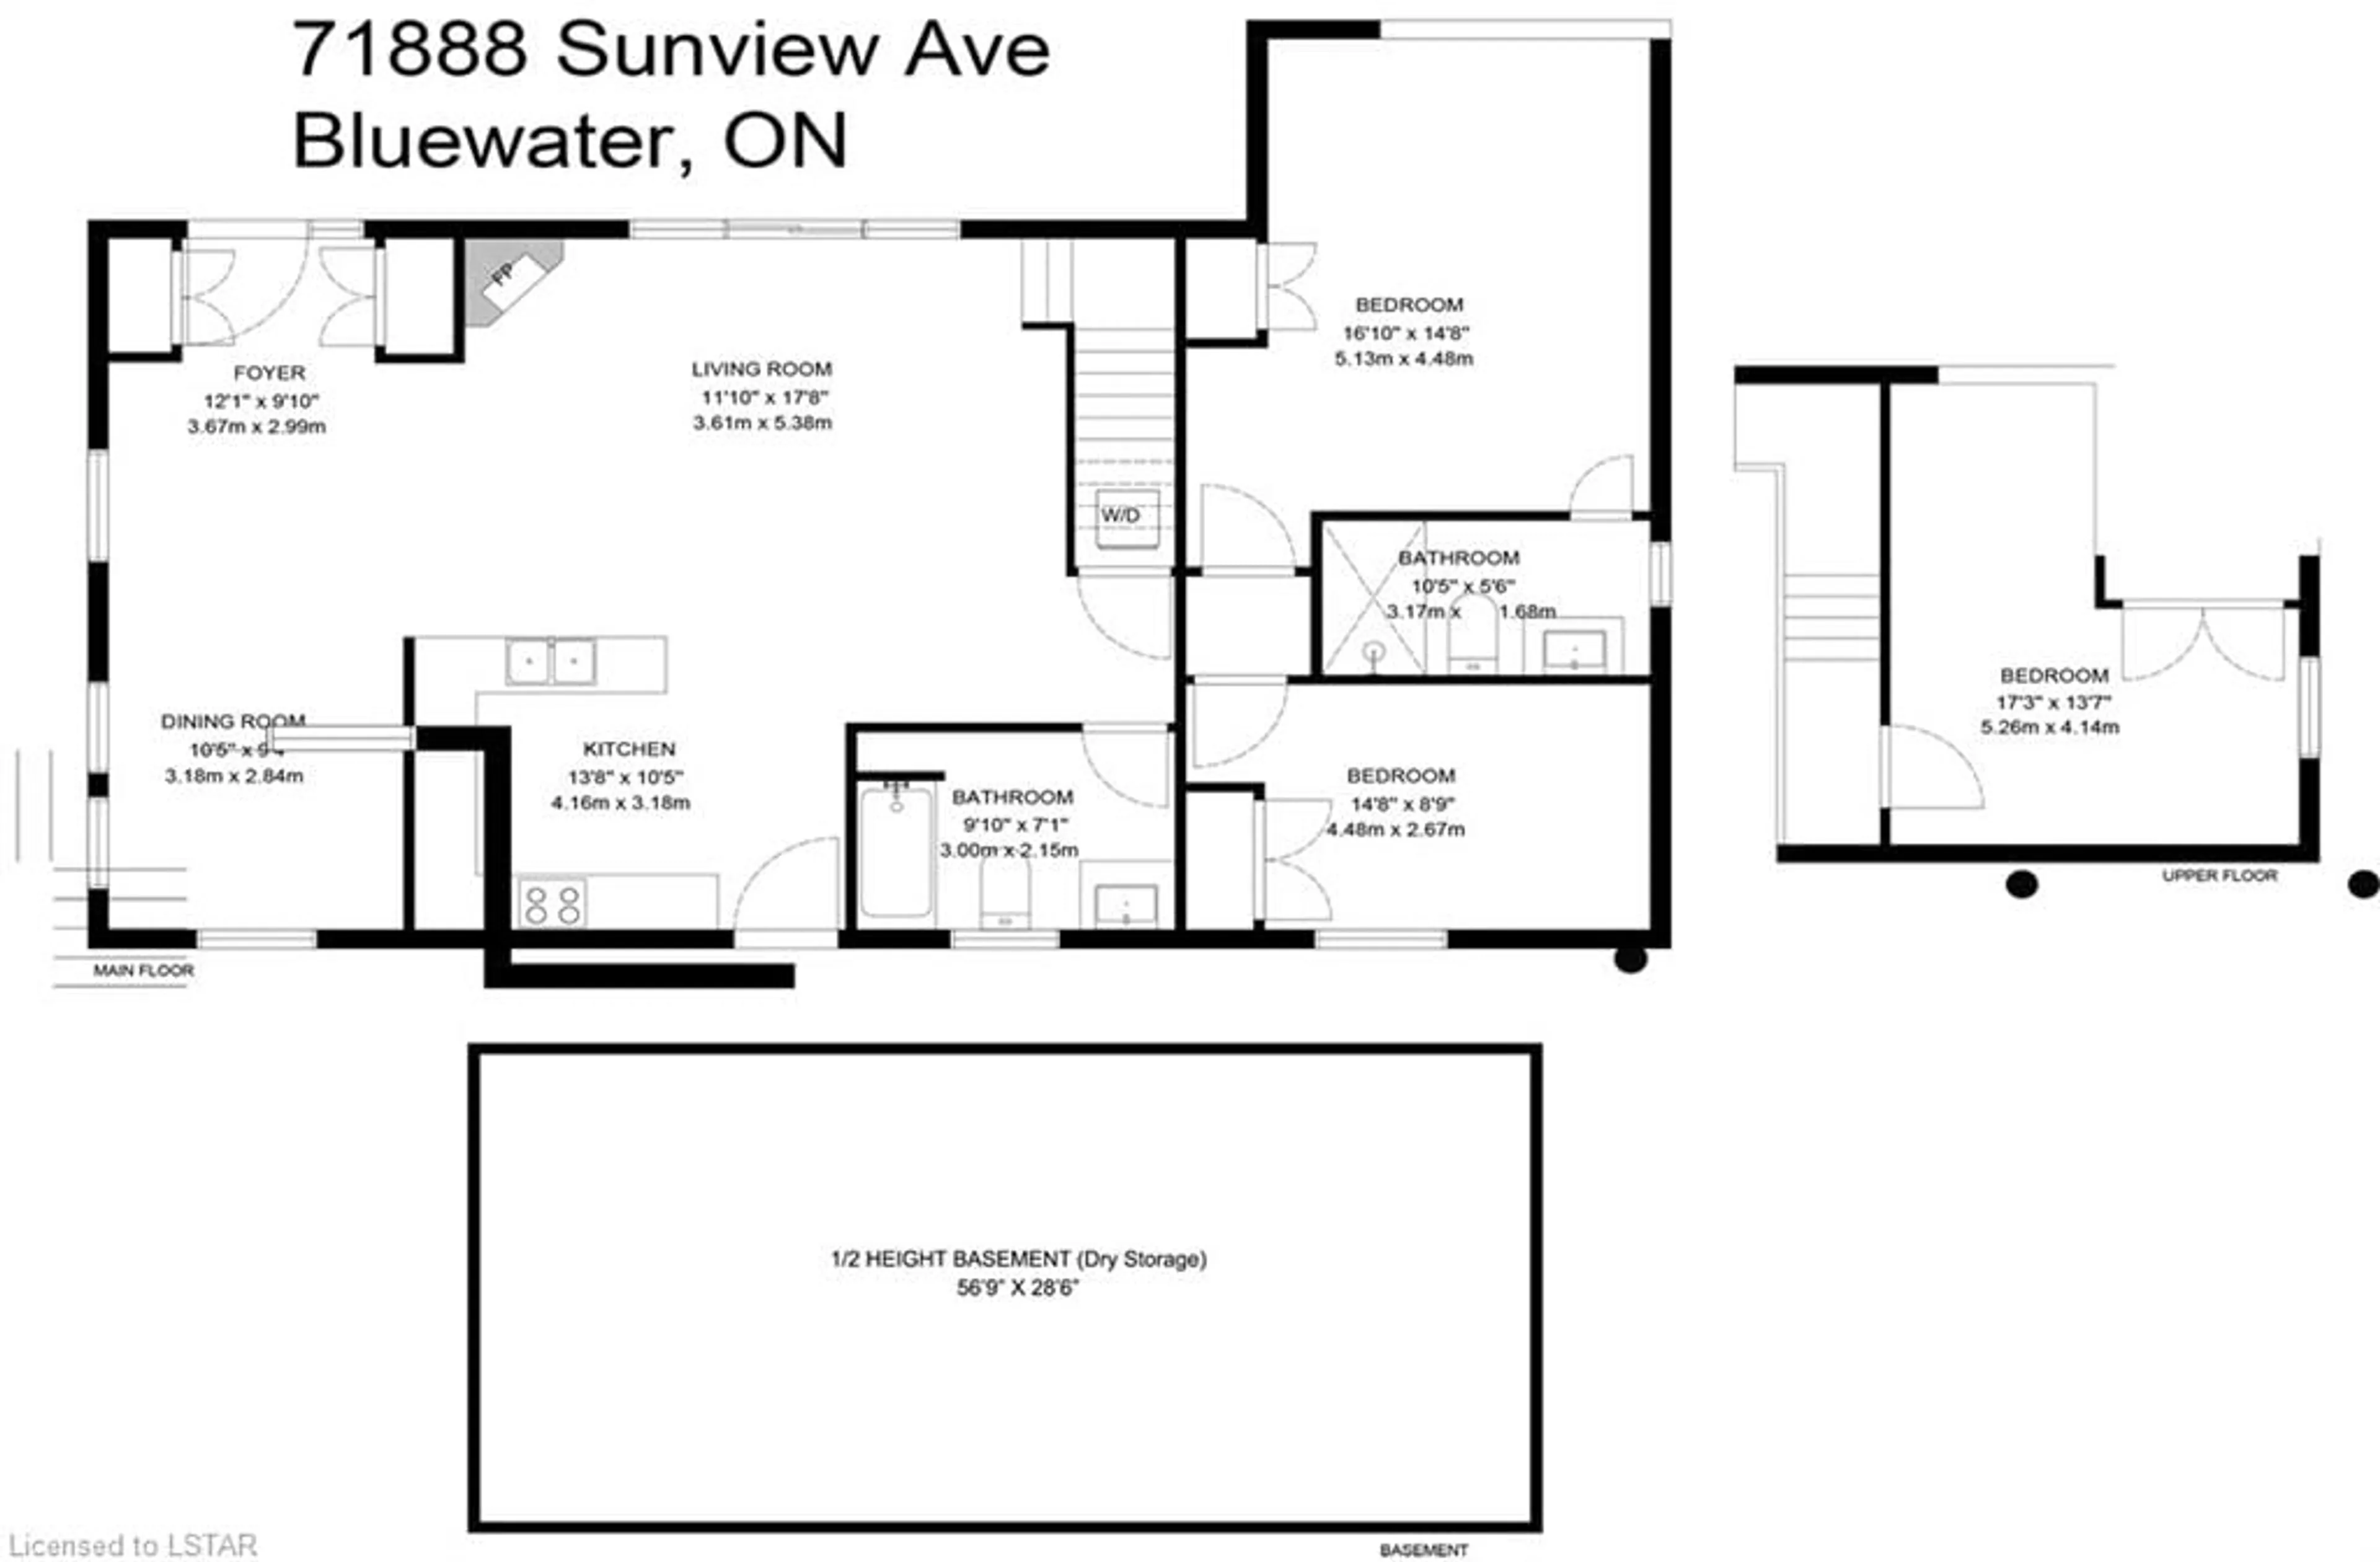 Floor plan for 71888 Sunview Ave, Bluewater (Munic) Ontario N0M 1N0